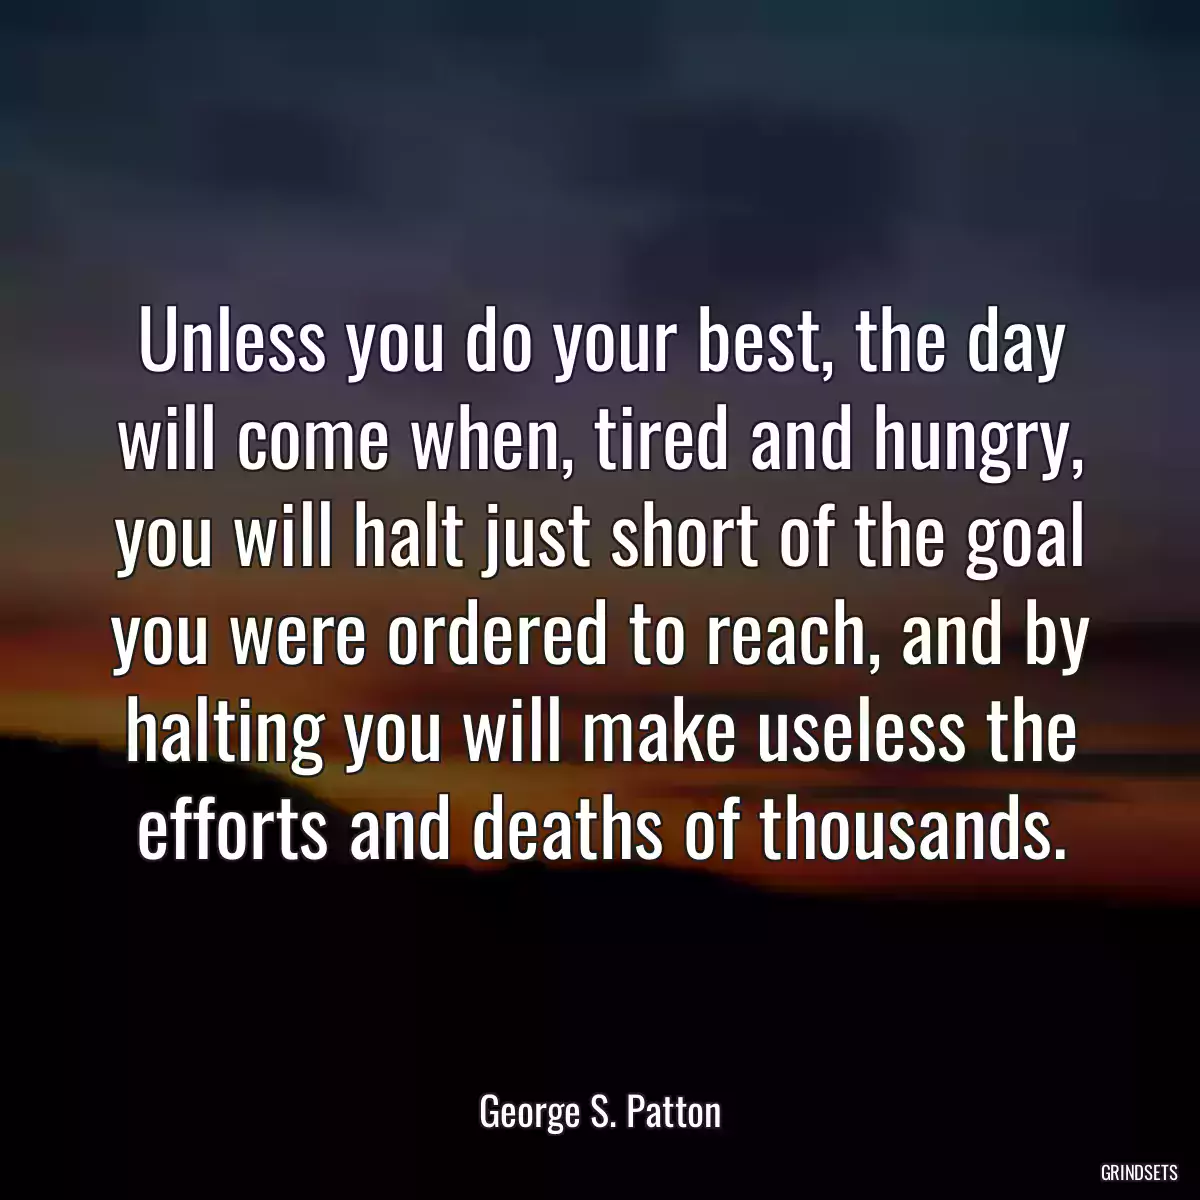 Unless you do your best, the day will come when, tired and hungry, you will halt just short of the goal you were ordered to reach, and by halting you will make useless the efforts and deaths of thousands.